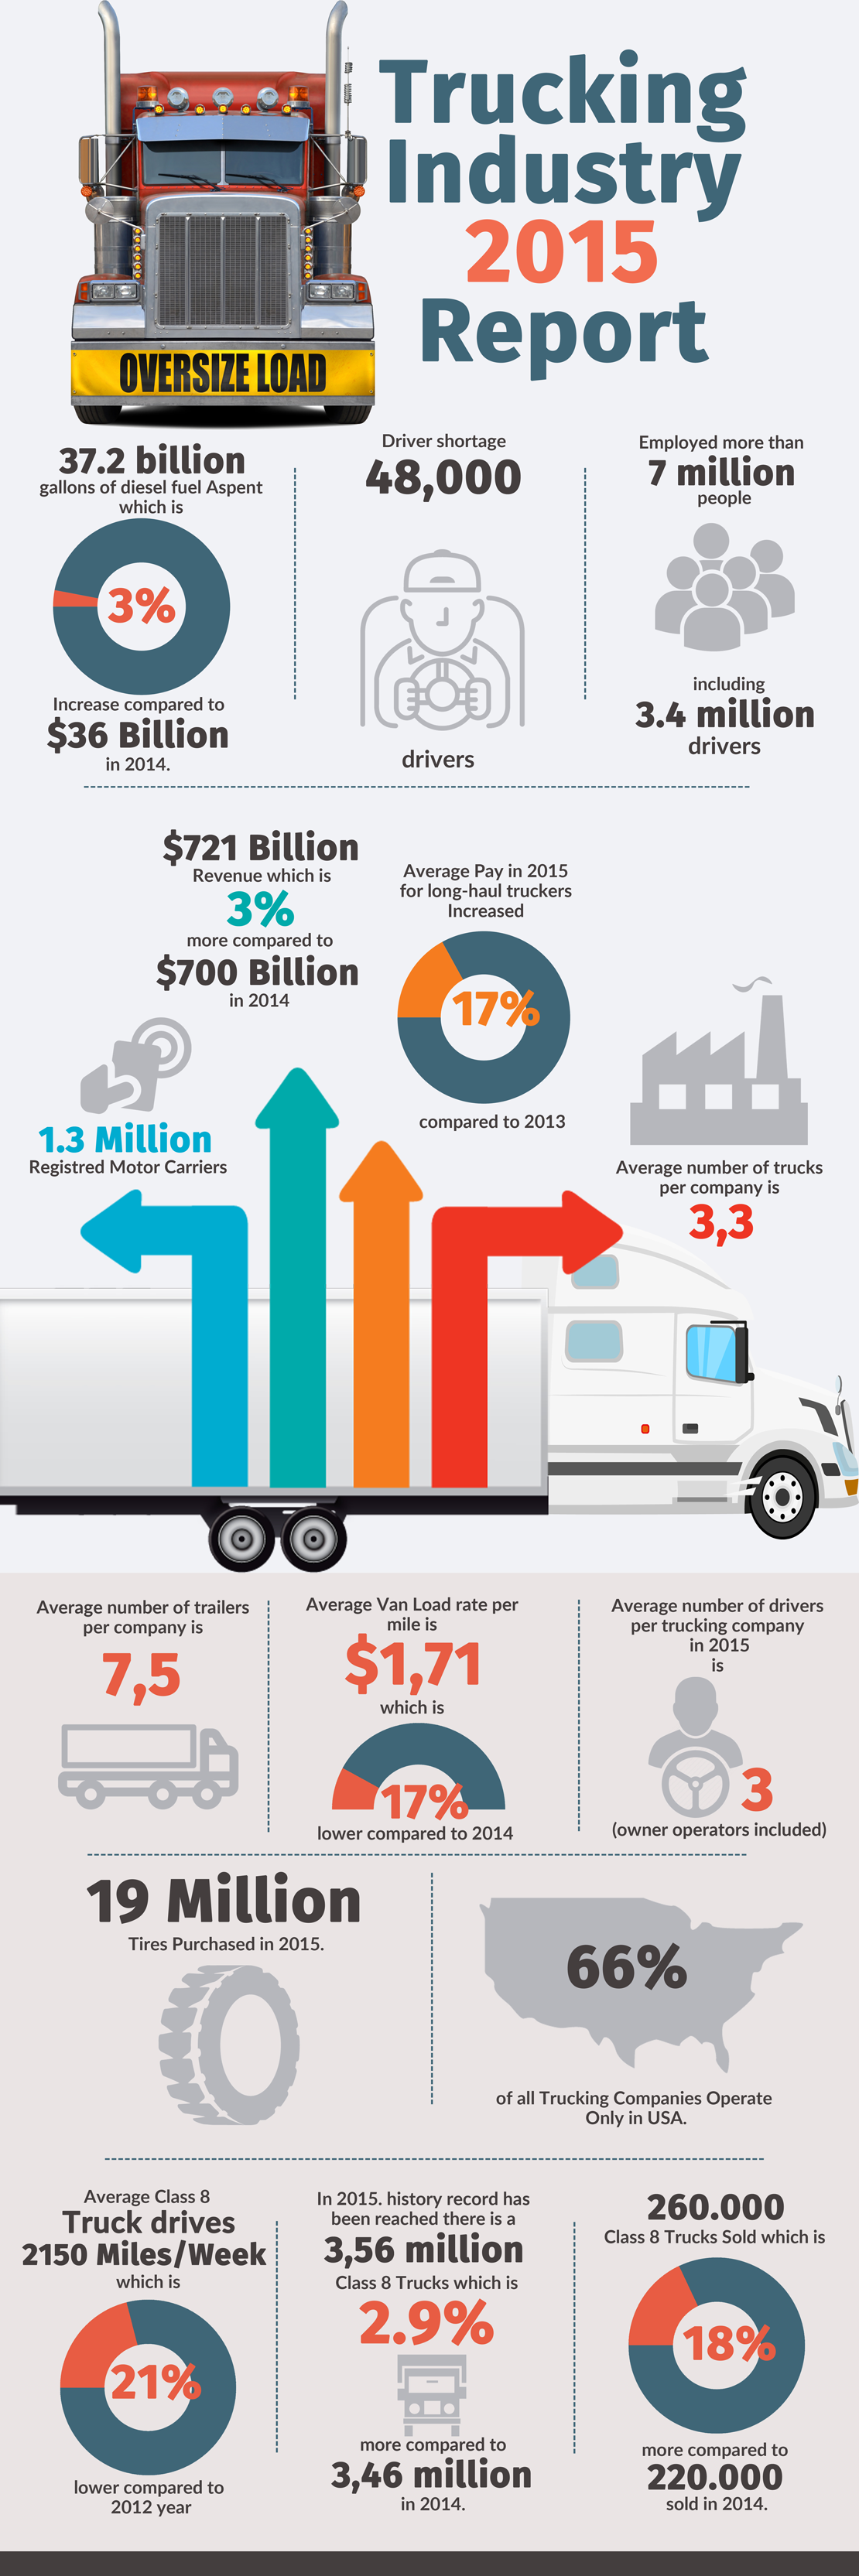 INFOGRAPHIC: Trucking Industry Report 2015